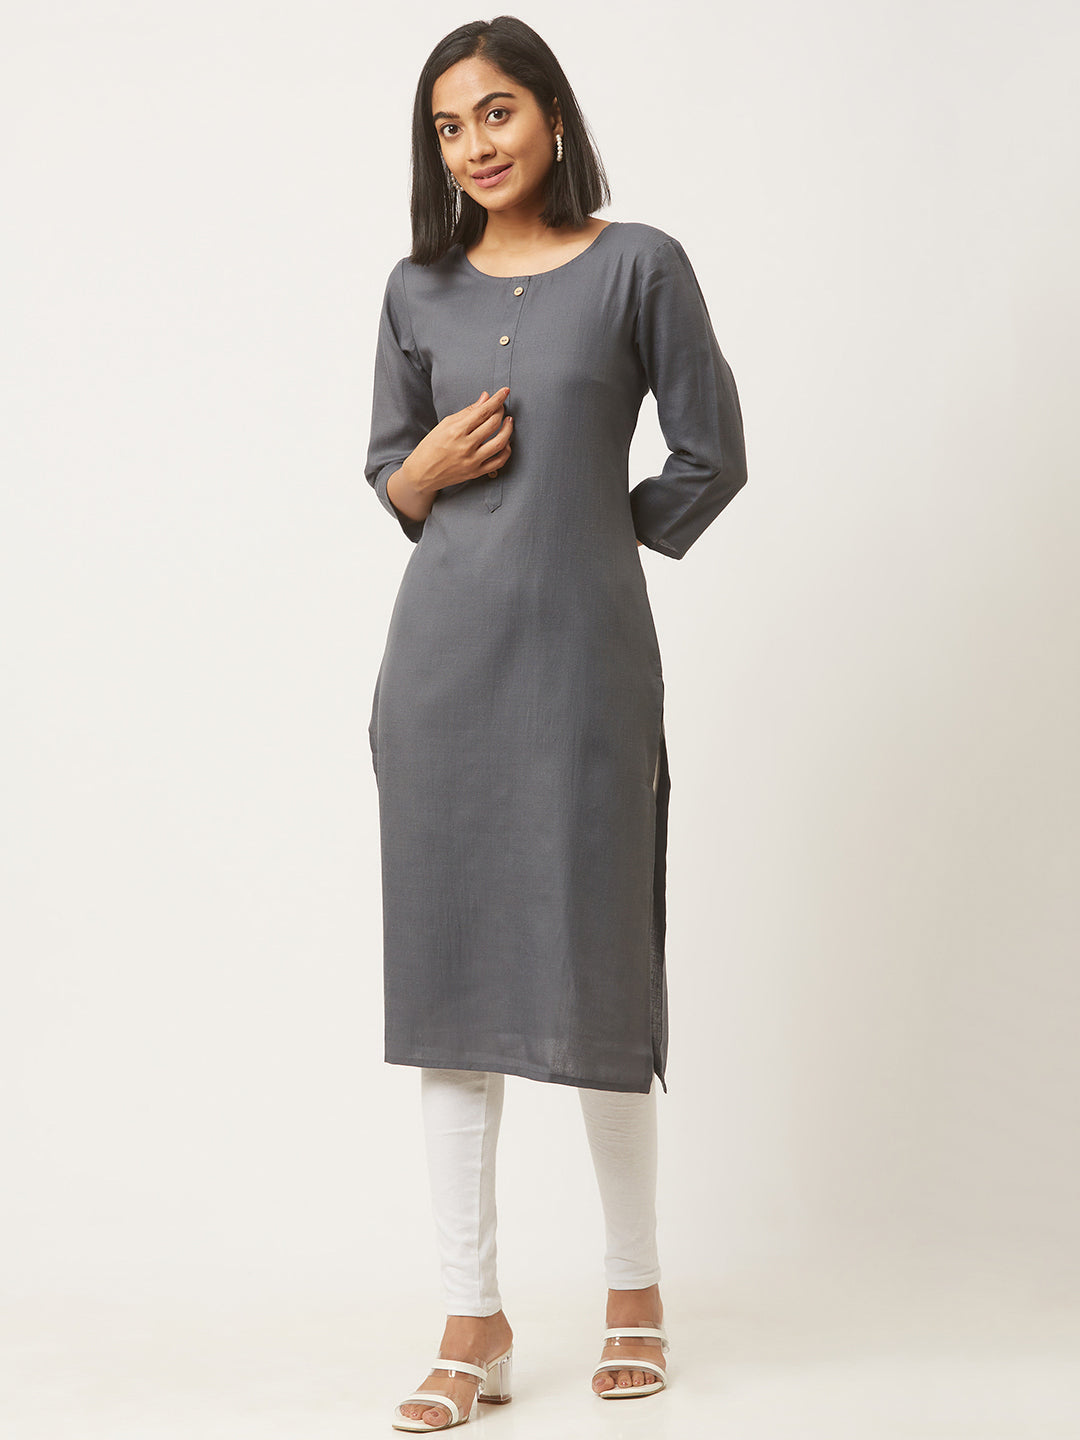 Grey Color Plain and Printed Angrakha Kurti at Rs.899/Piece in jaipur offer  by Wellforia Private Limited